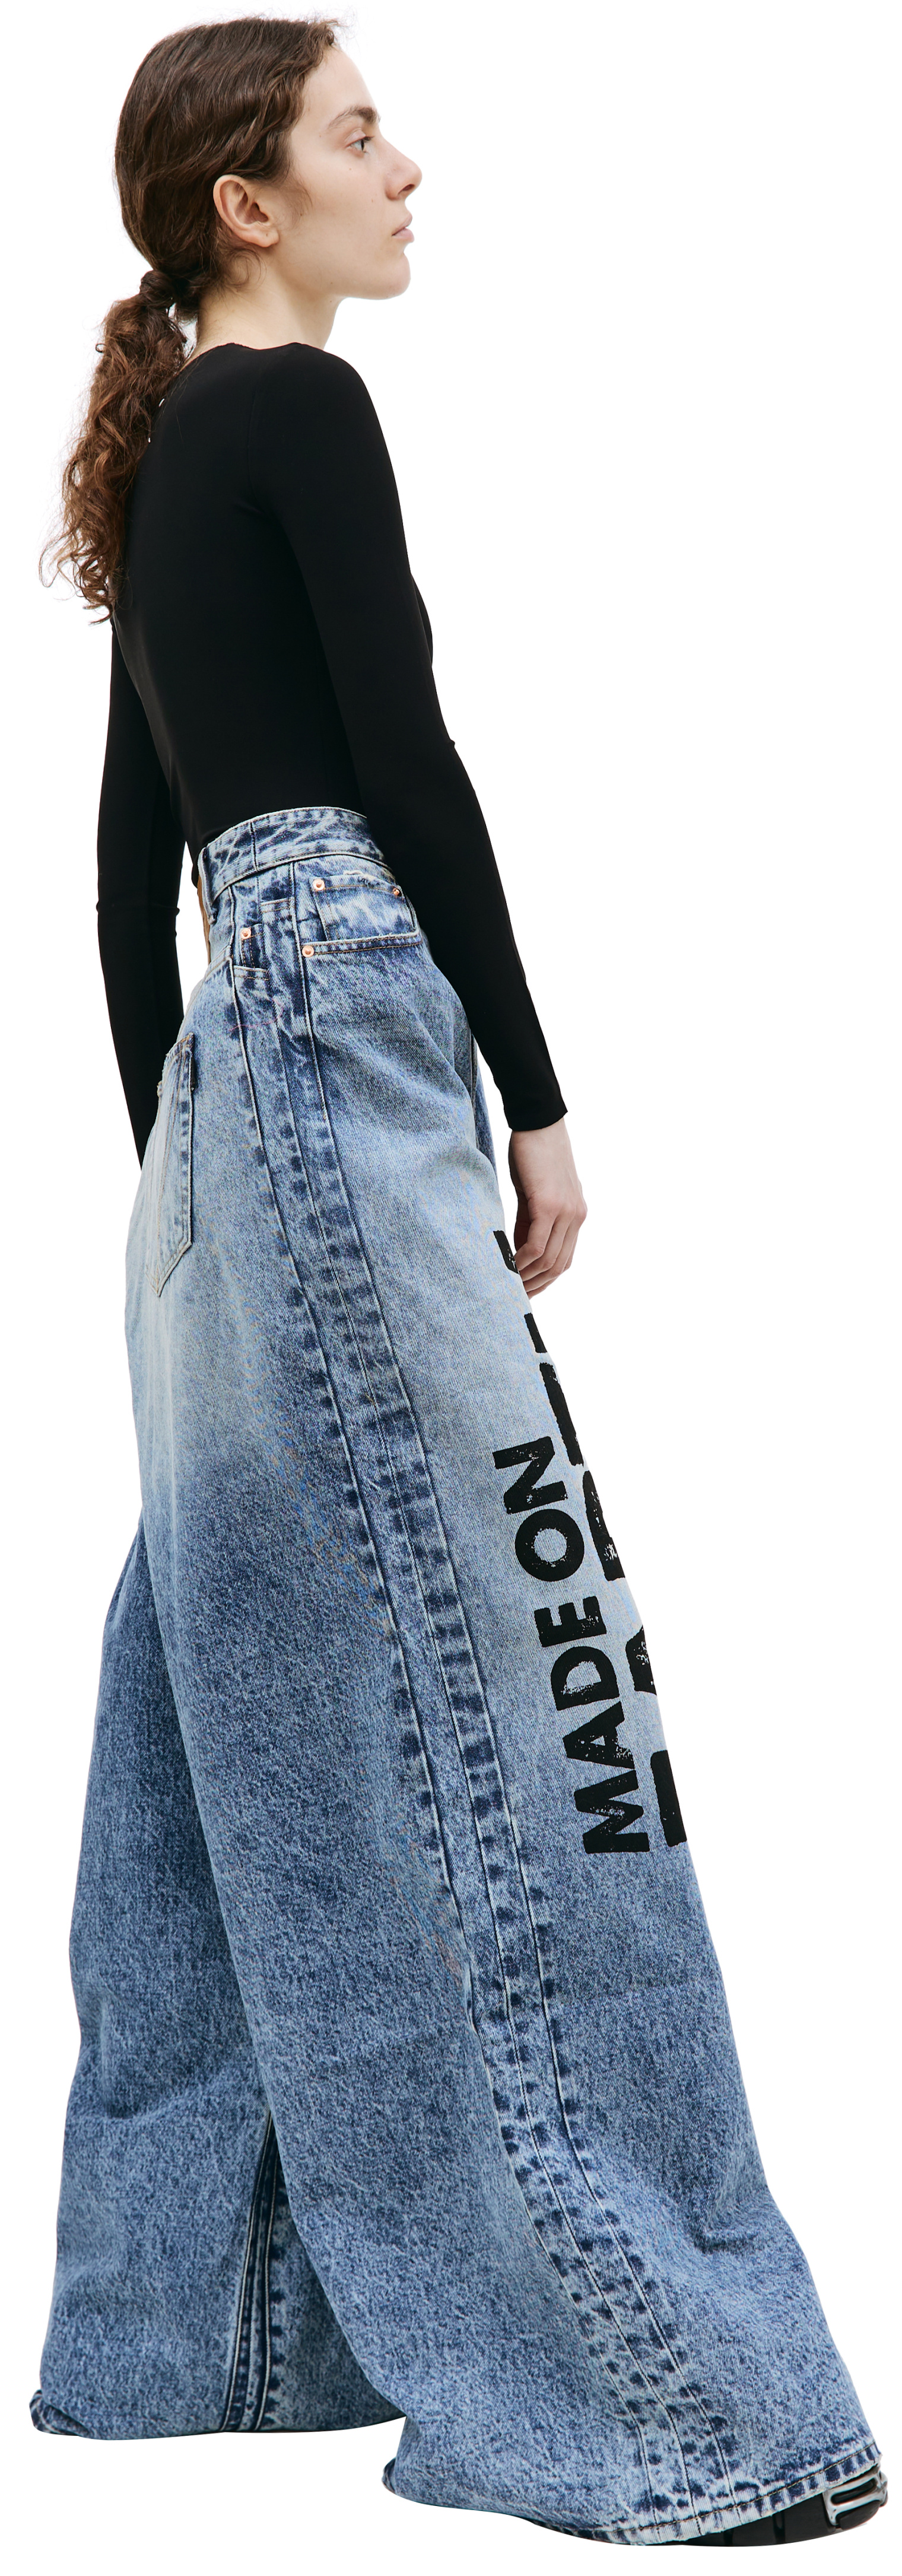 VETEMENTS \'Made on earth\' printed jeans